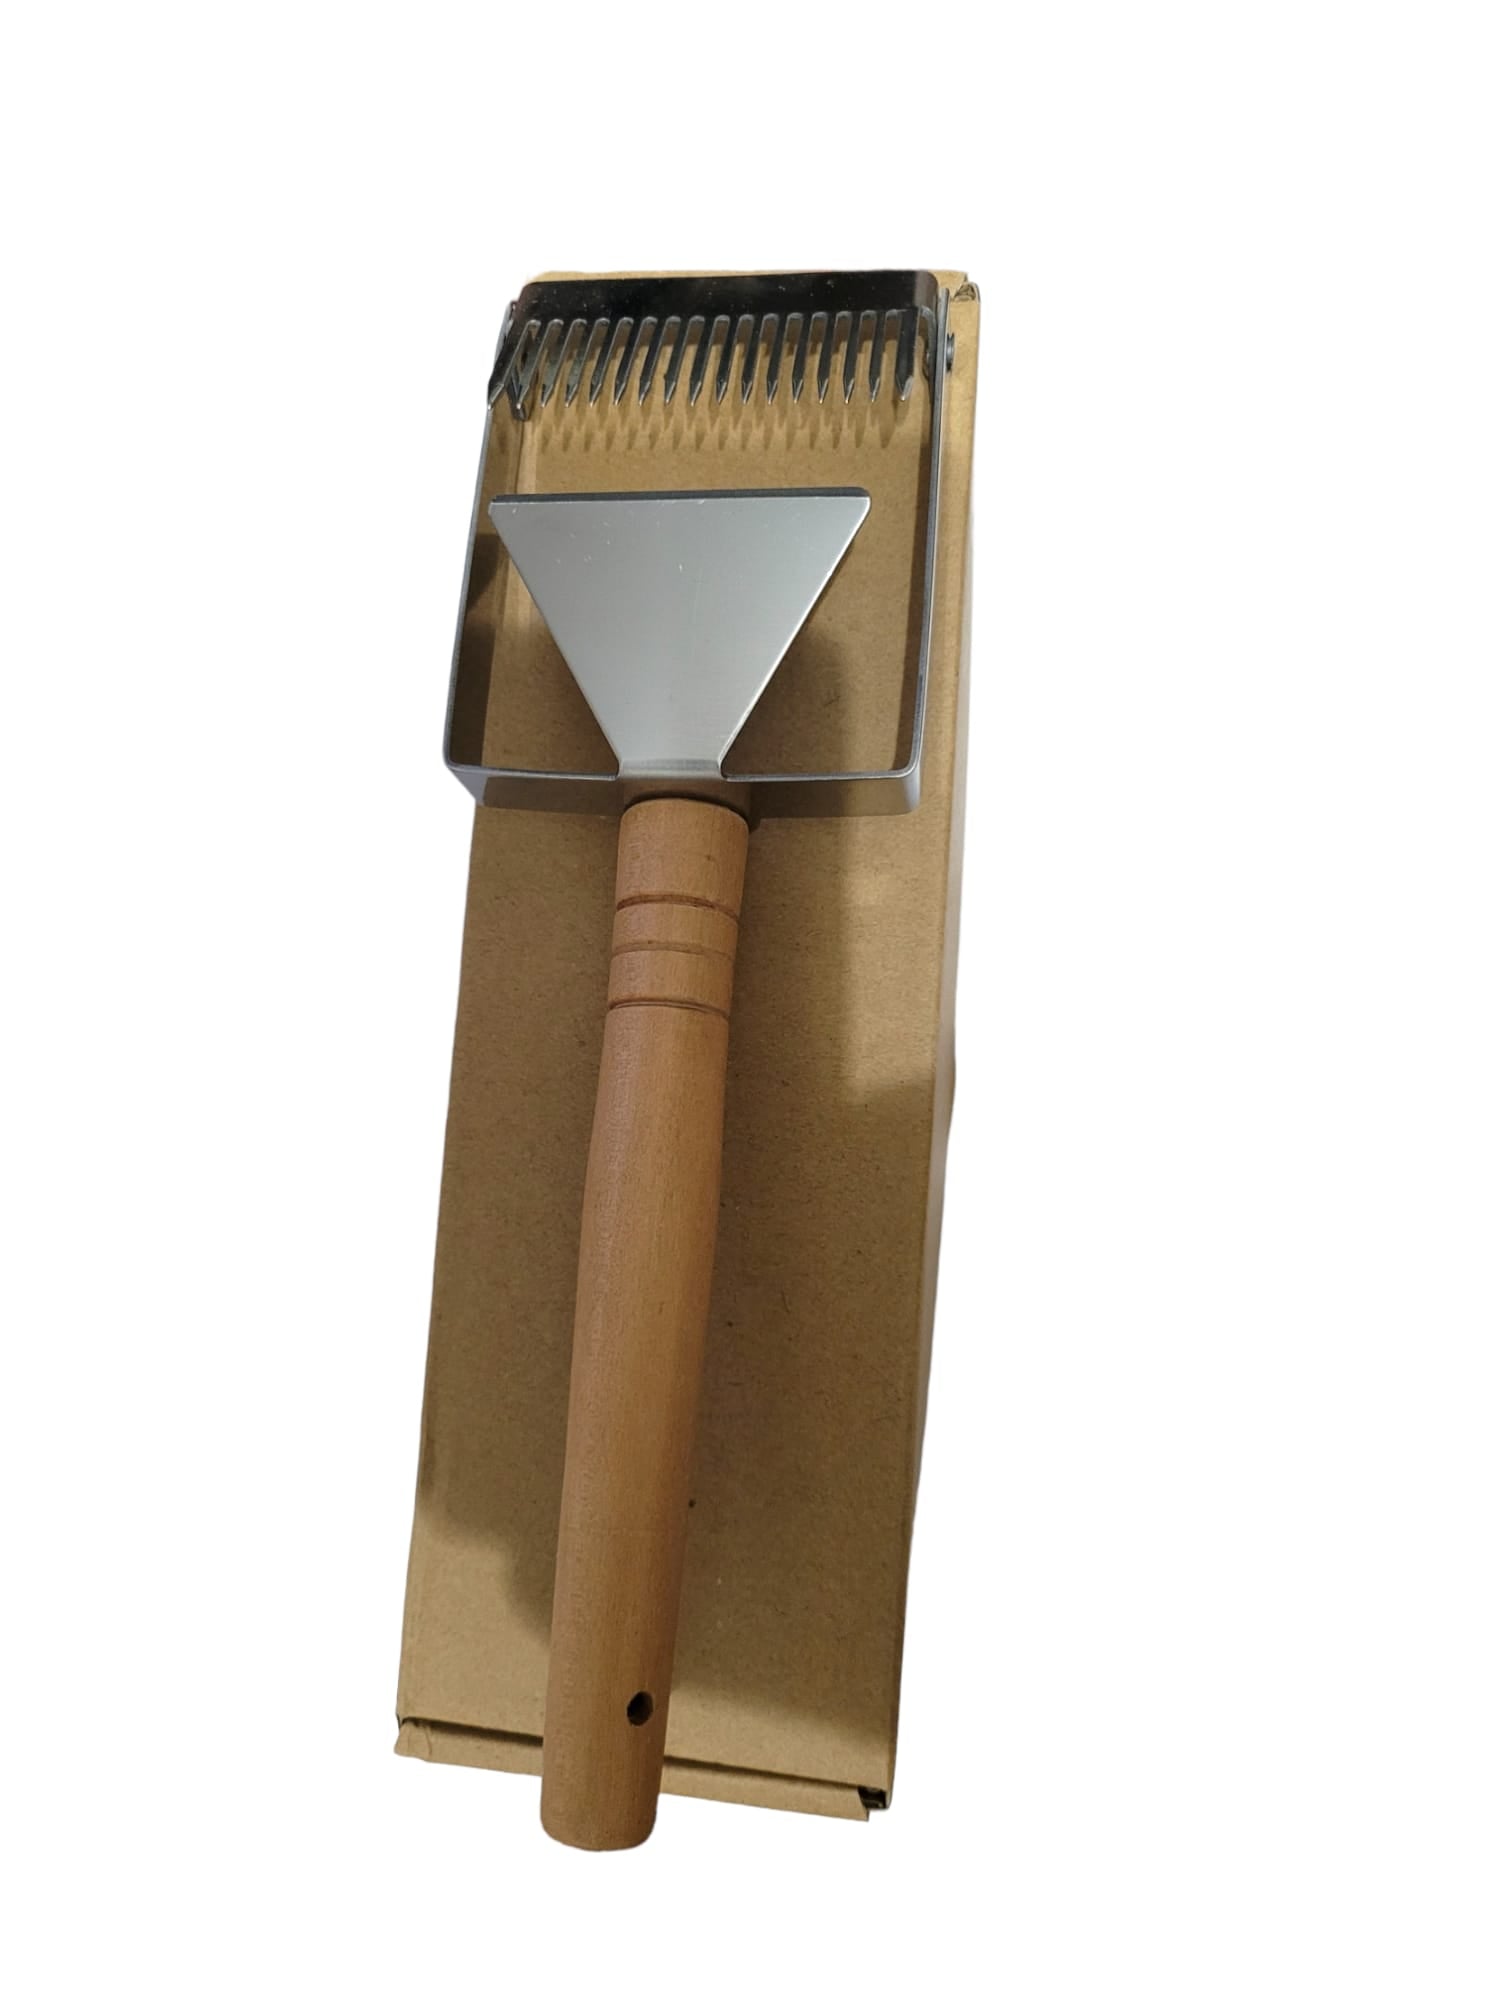 Honey Uncapping Tool - Donagh Bees